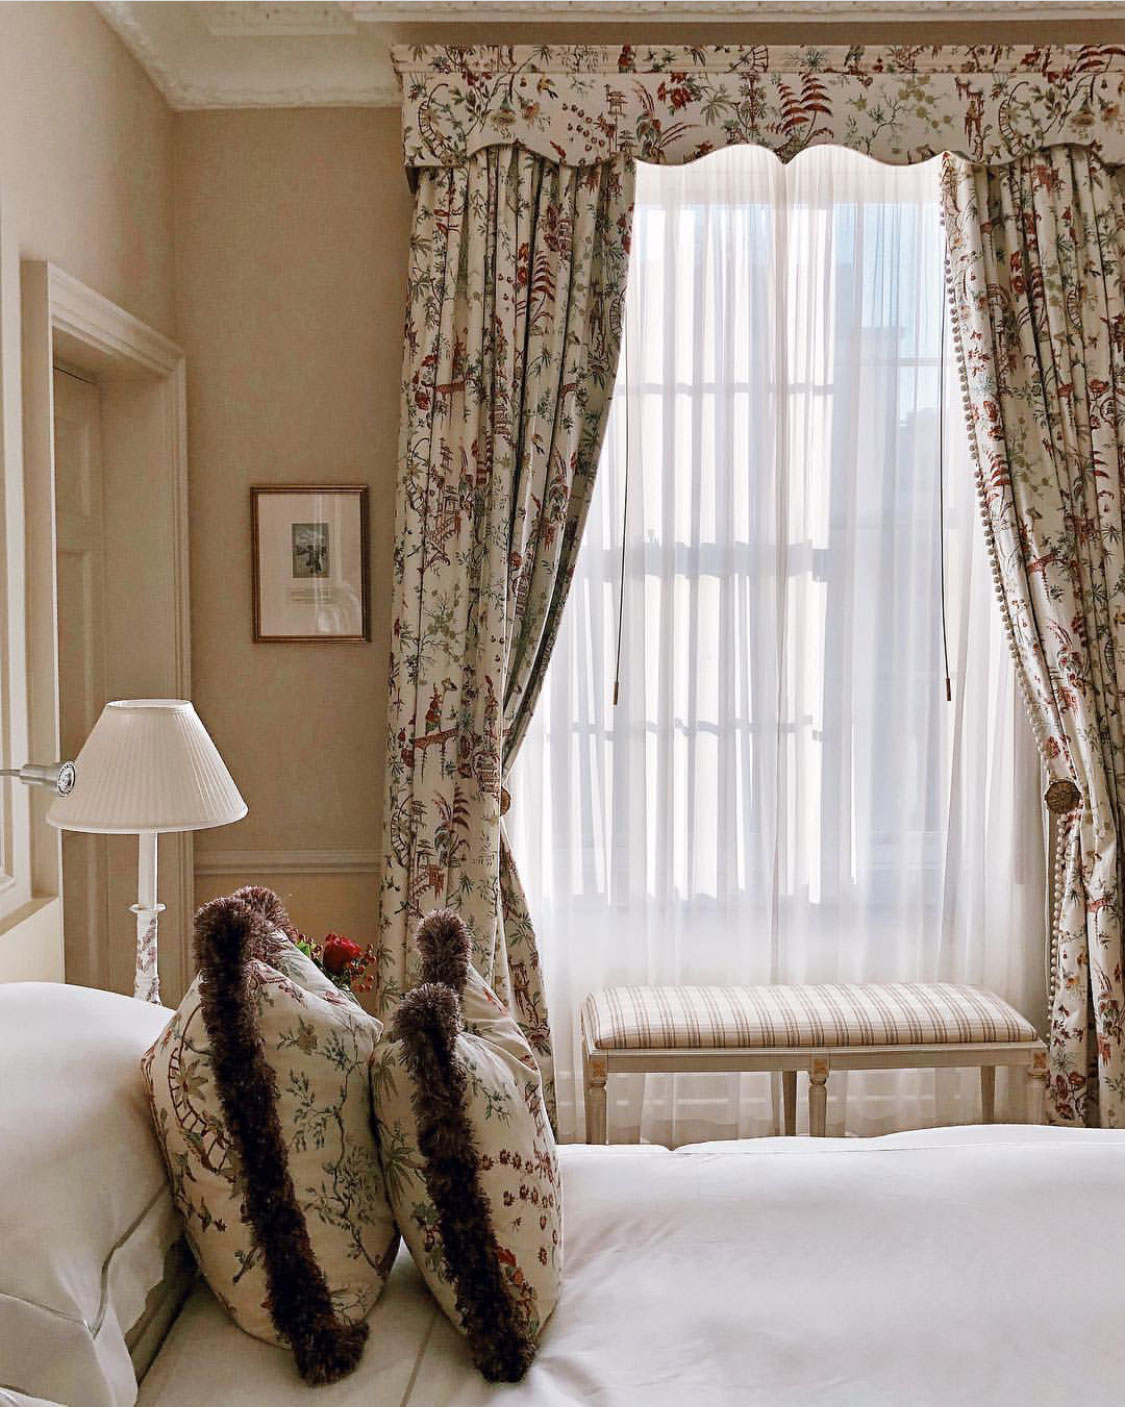 Weekday Wanderlust | Places: The Merrion Hotel Dublin